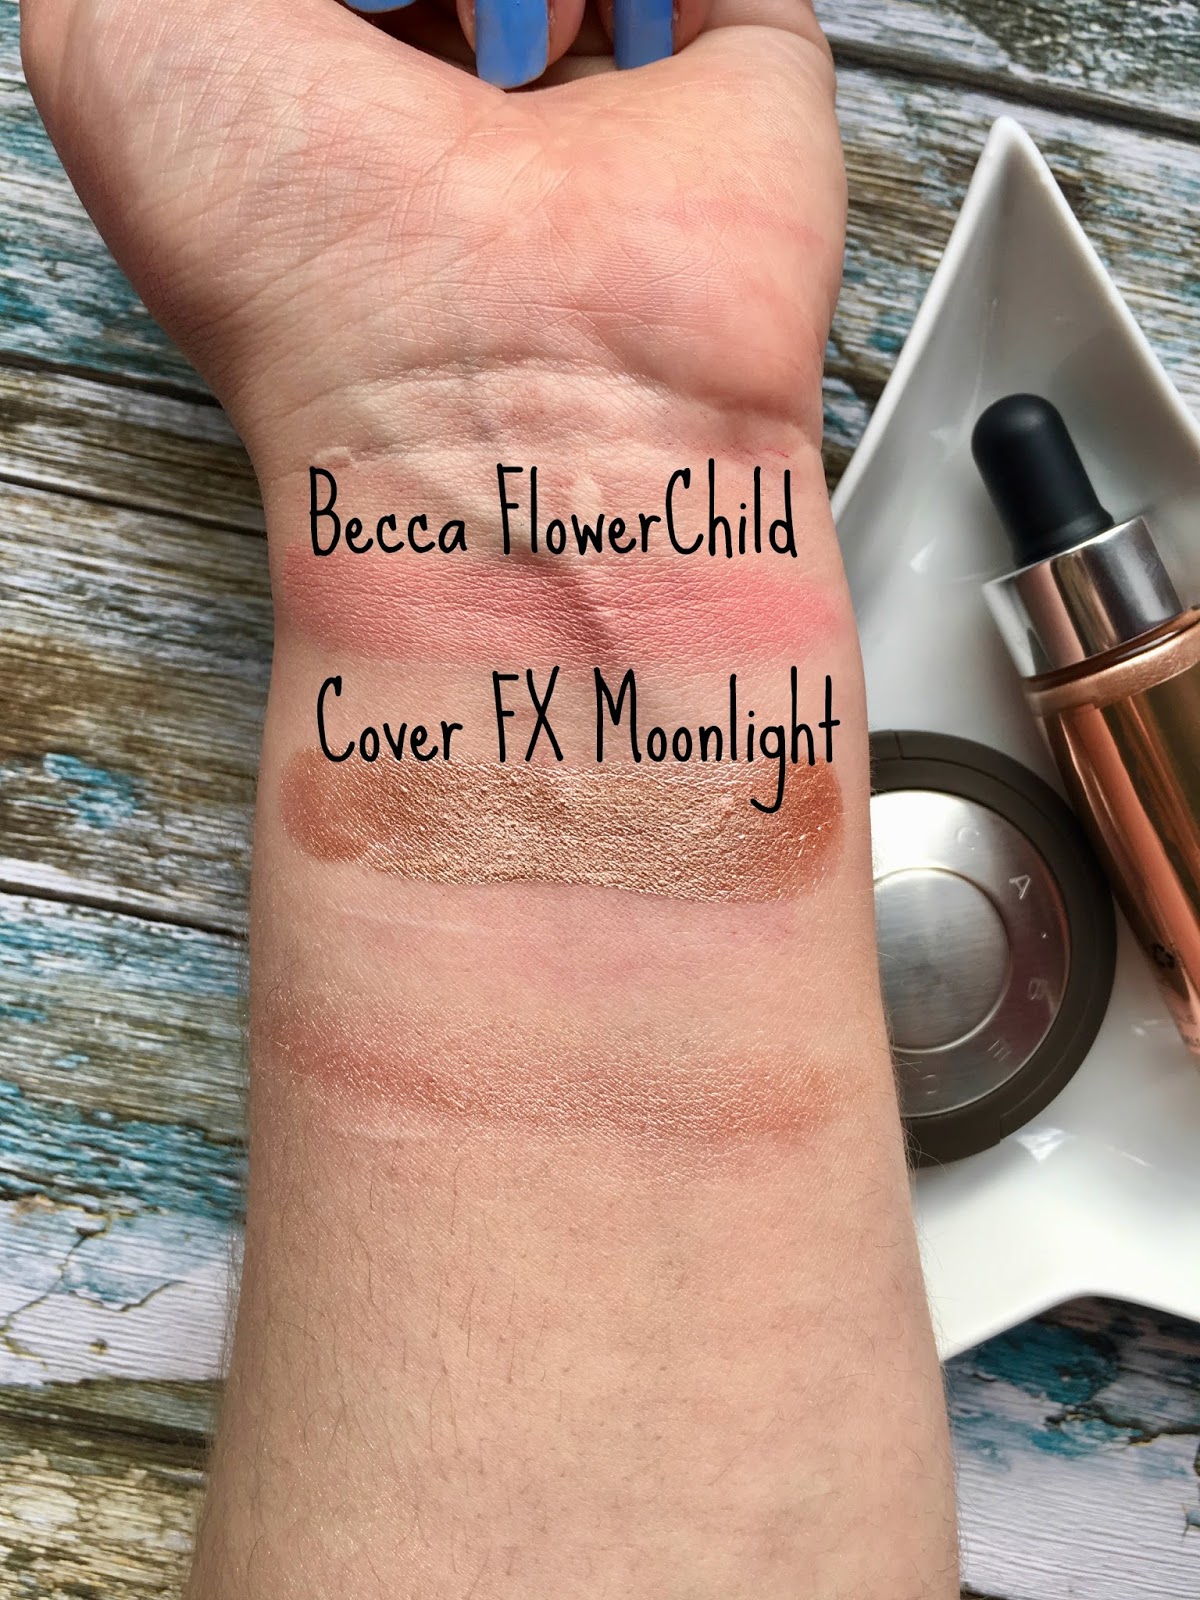 SpaceNK Haul, Swatches, CoverFX drops moonlight, becca flower child